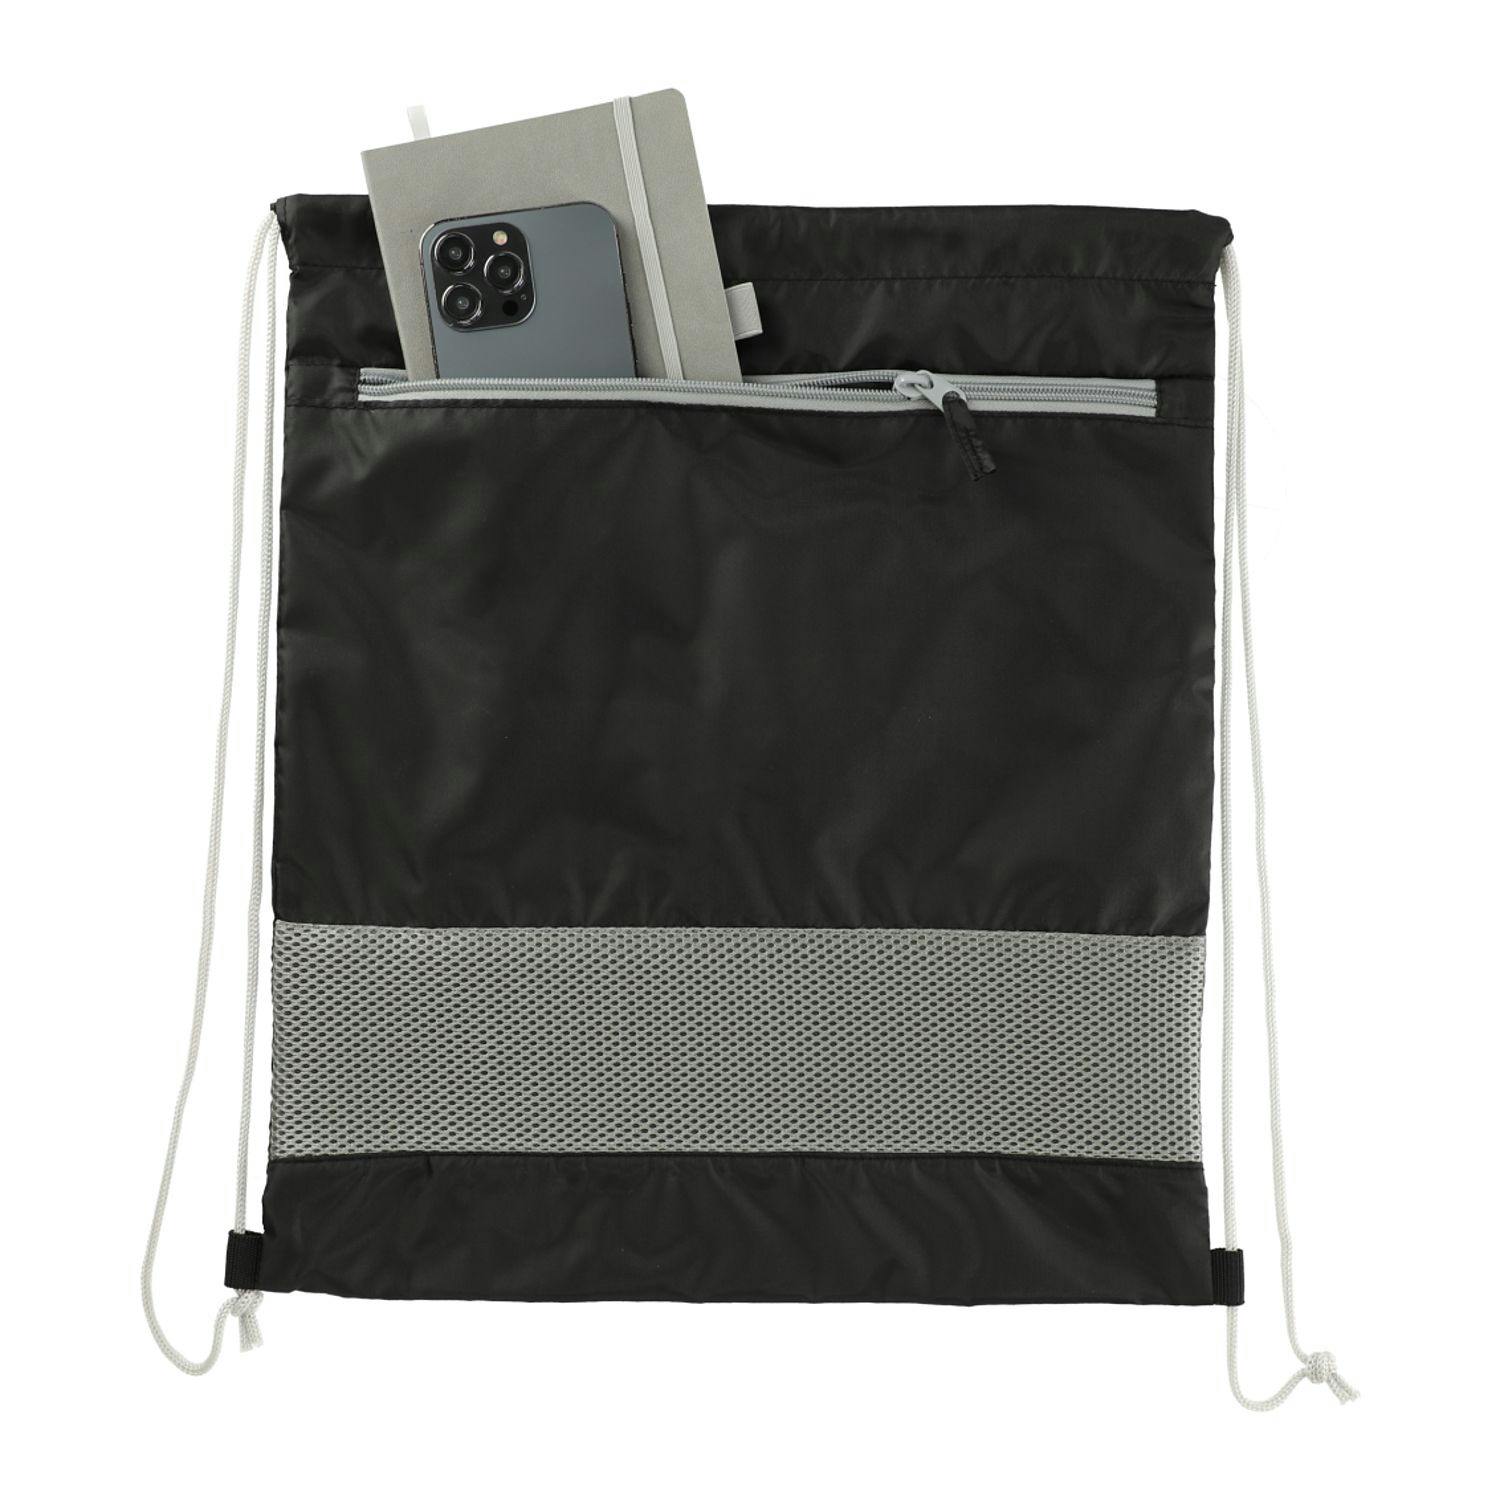 Sparks Recycled Drawstring Bag - additional Image 1